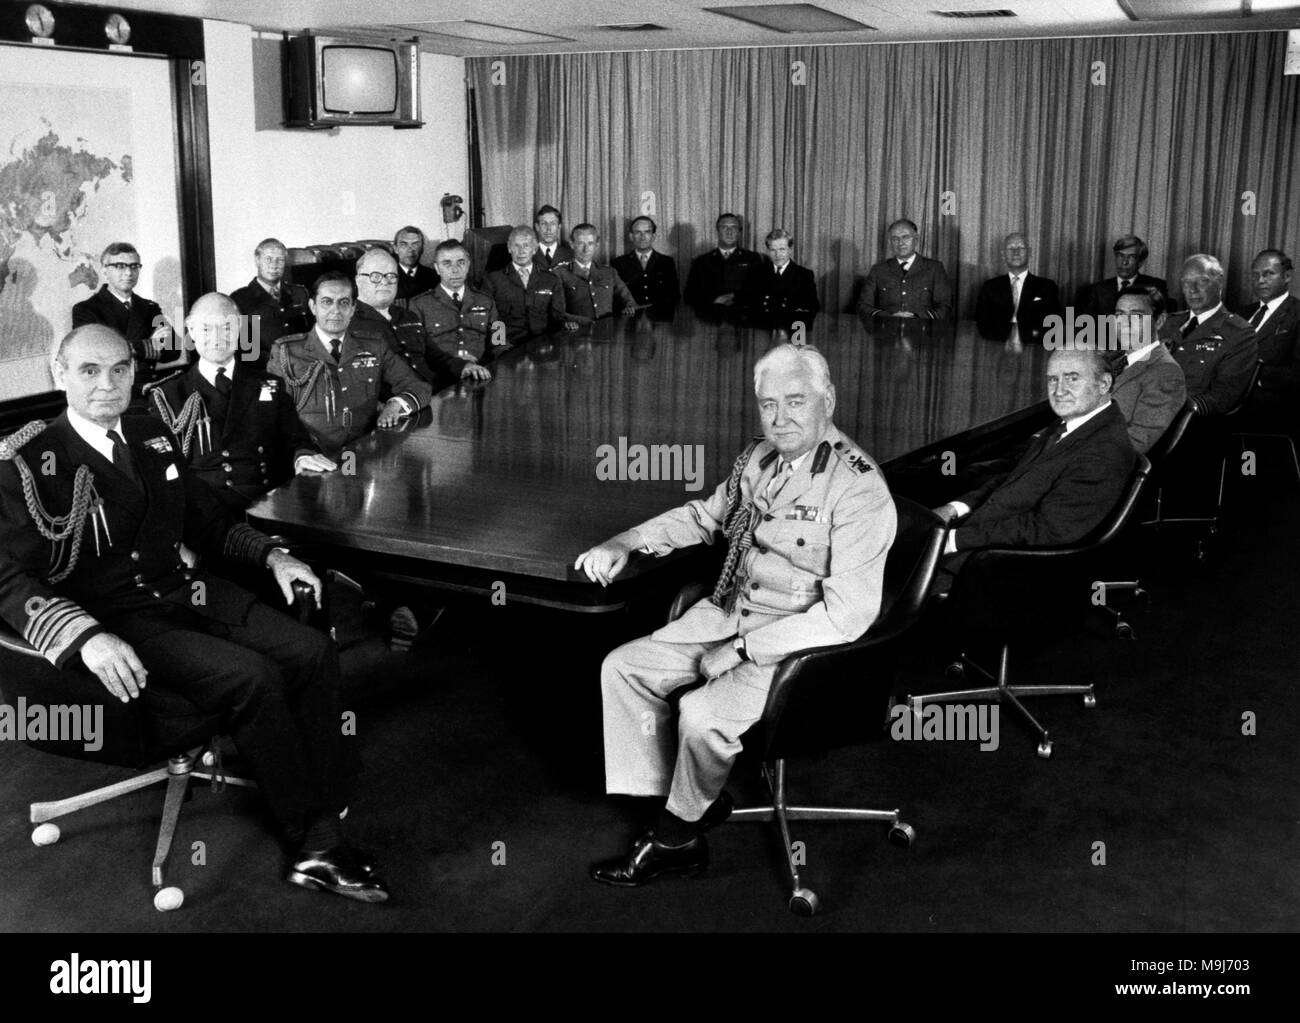 The Chiefs of Defence Staff grouped around the conference table in Whitehall at the height of the Falklands conflict. (L-R) Admiral of The Fleet Sir Terence Lewin, Chief of Defence Staff; Captain Raymond, Deputy Secretary, Chief of Staff's Committee; Admiral Sir Henry Leach, Chief of the Naval Staff and First Sea Lord; Lieutenant Colonel Bale, Assistant Secretary One; Air Chief Marshal Sir Michael Beetham, Chief of the Air Staff; Brigadier Eyre, Secretary, Chief of Staff's Committee; Commander Bickley, Assistant Secretary Two; Air Vice Marshal Gilbert, Assistant Chief of the Defence Staff (pol Stock Photo